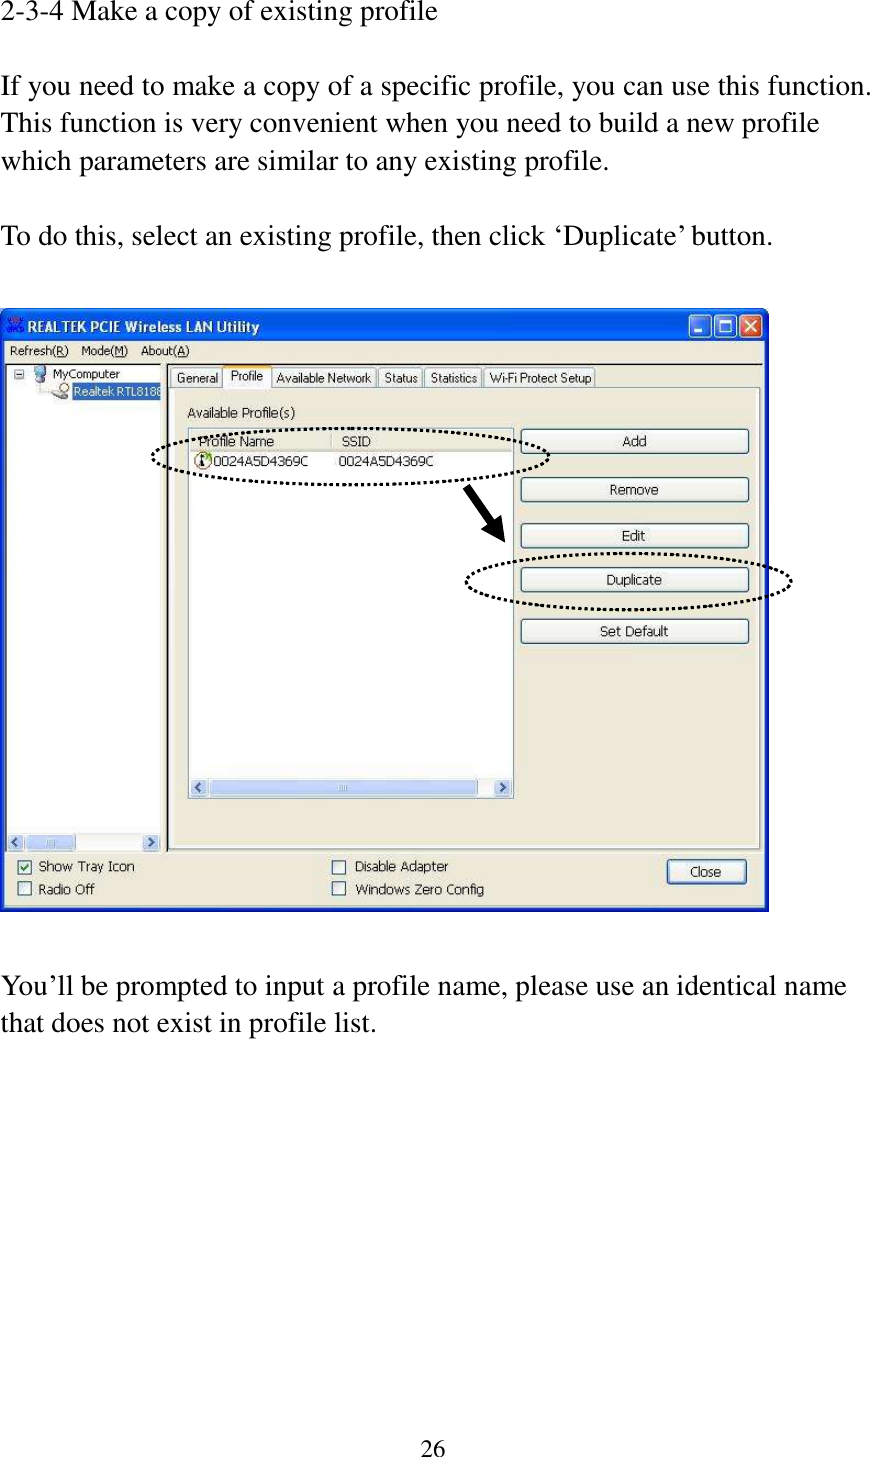 26  2-3-4 Make a copy of existing profile  If you need to make a copy of a specific profile, you can use this function. This function is very convenient when you need to build a new profile which parameters are similar to any existing profile.  To do this, select an existing profile, then click ‘Duplicate’ button.    You’ll be prompted to input a profile name, please use an identical name that does not exist in profile list. 